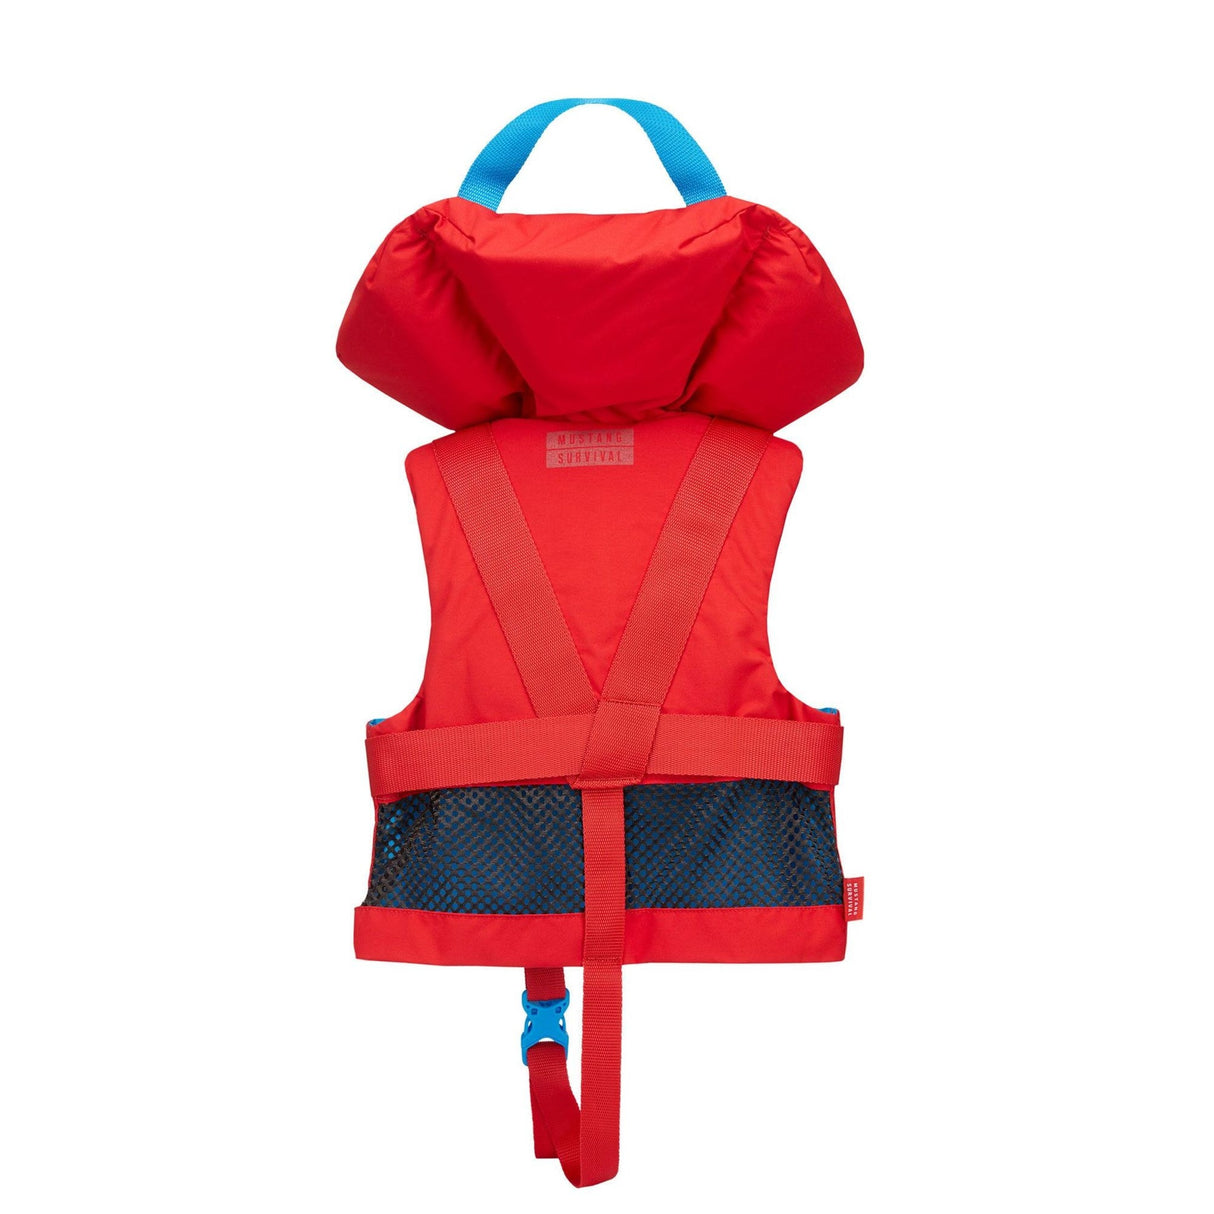 MUSTANG INFANT LIL LEGENDS FOAM PFD IMPERIAL RED